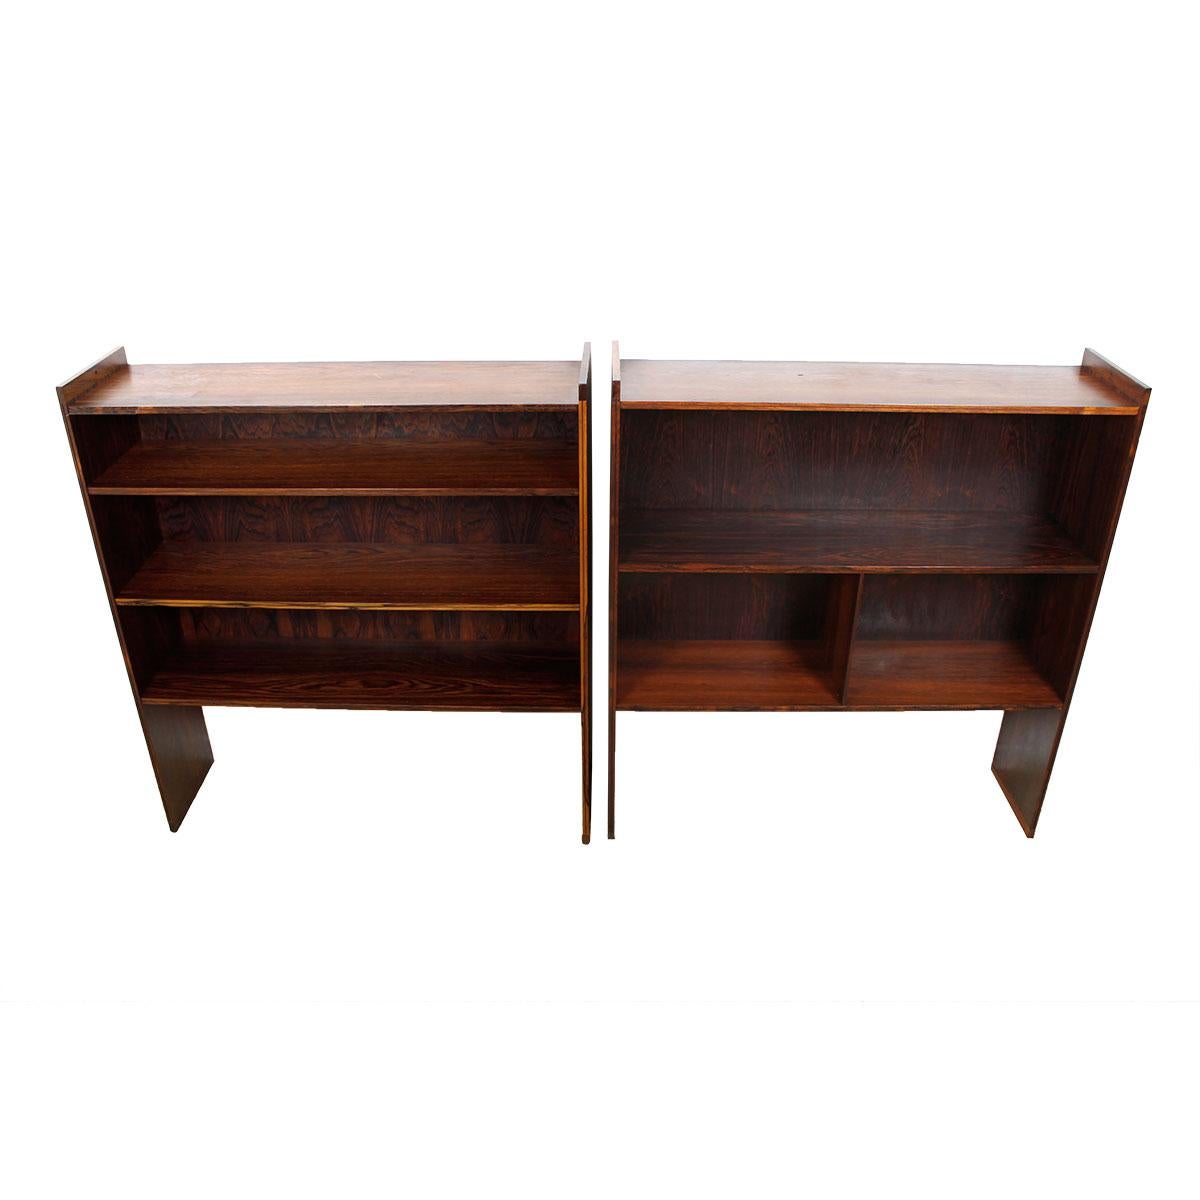 From the Royal Danish Embassy in Washington, DC we are pleased to offer this lovely bookcase by Grete Jalk. Incredible figuring in the rosewood grain. Can be placed directly on the floor or placed on top of another piece, such as a rosewood cabinet.